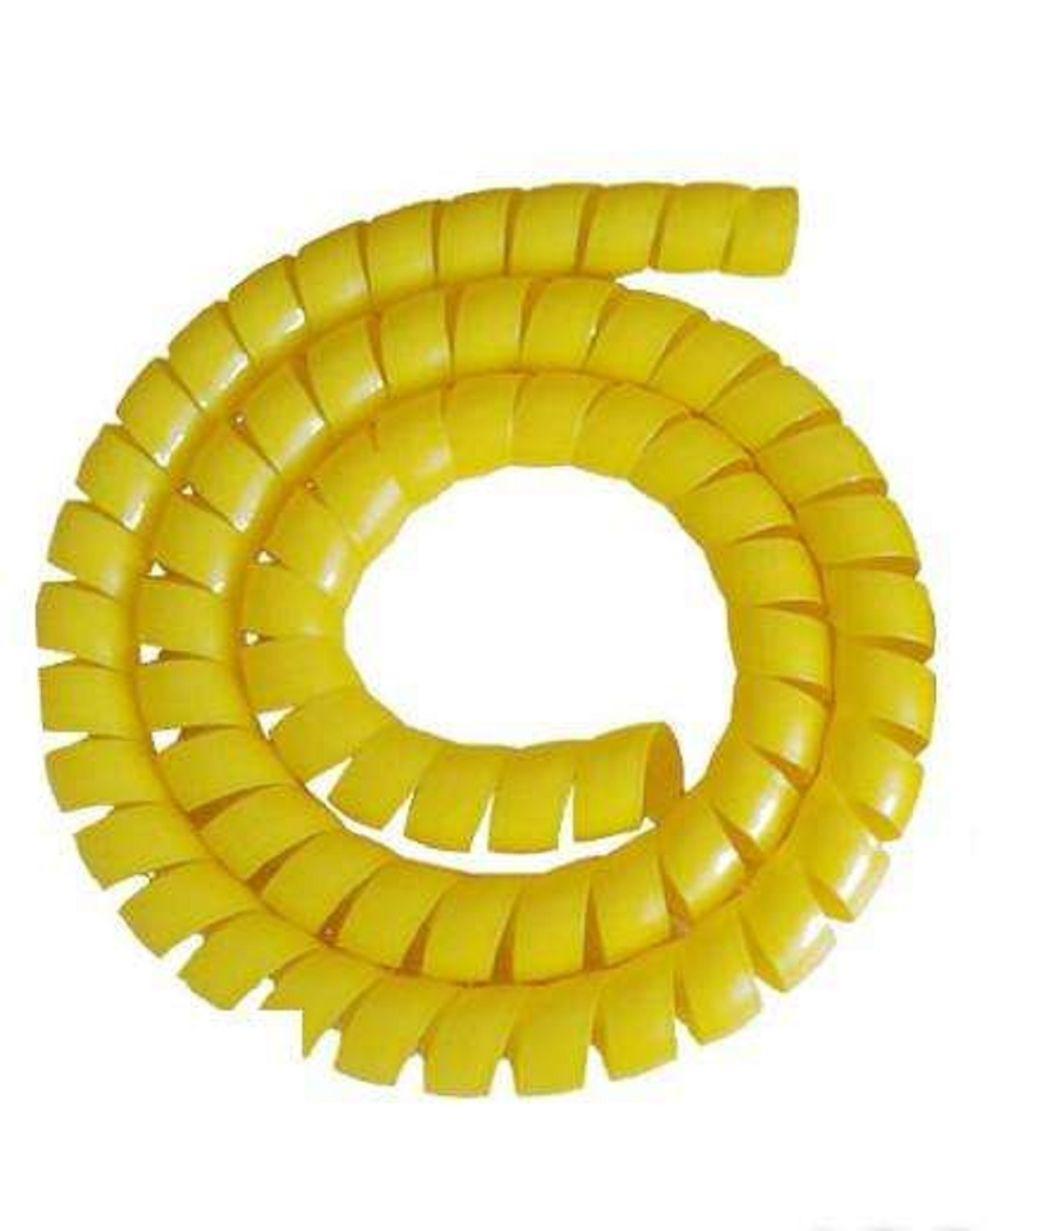 Colorful Hydraulic Rubber Hose Spiral Cover Hose Protector